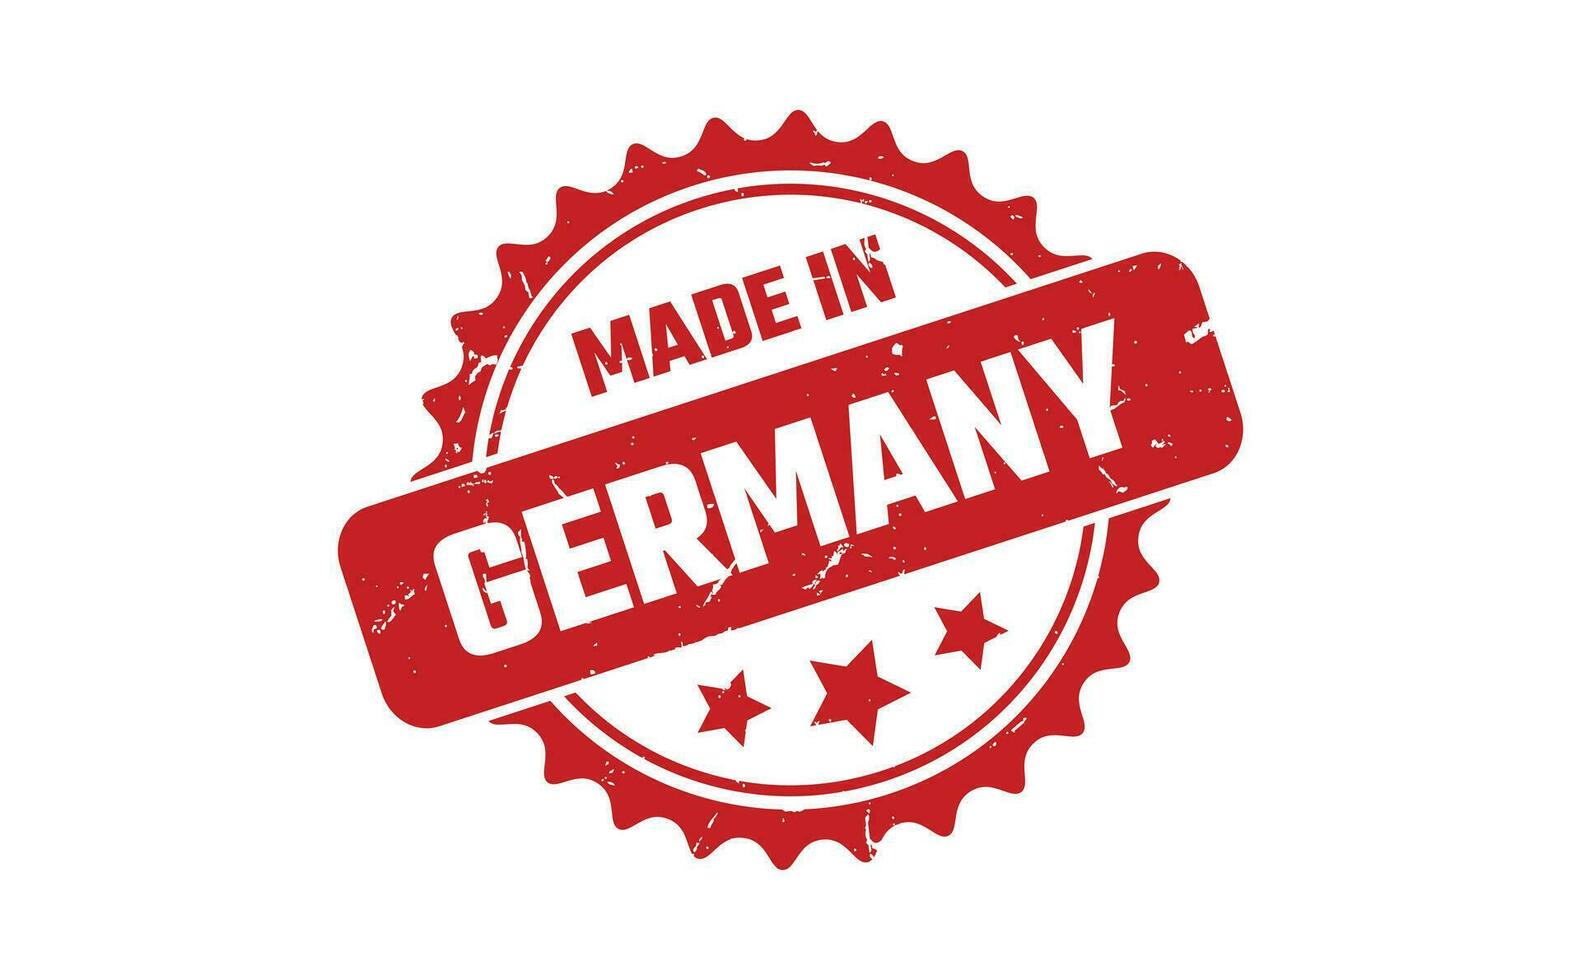 Made In Germany Rubber Stamp vector